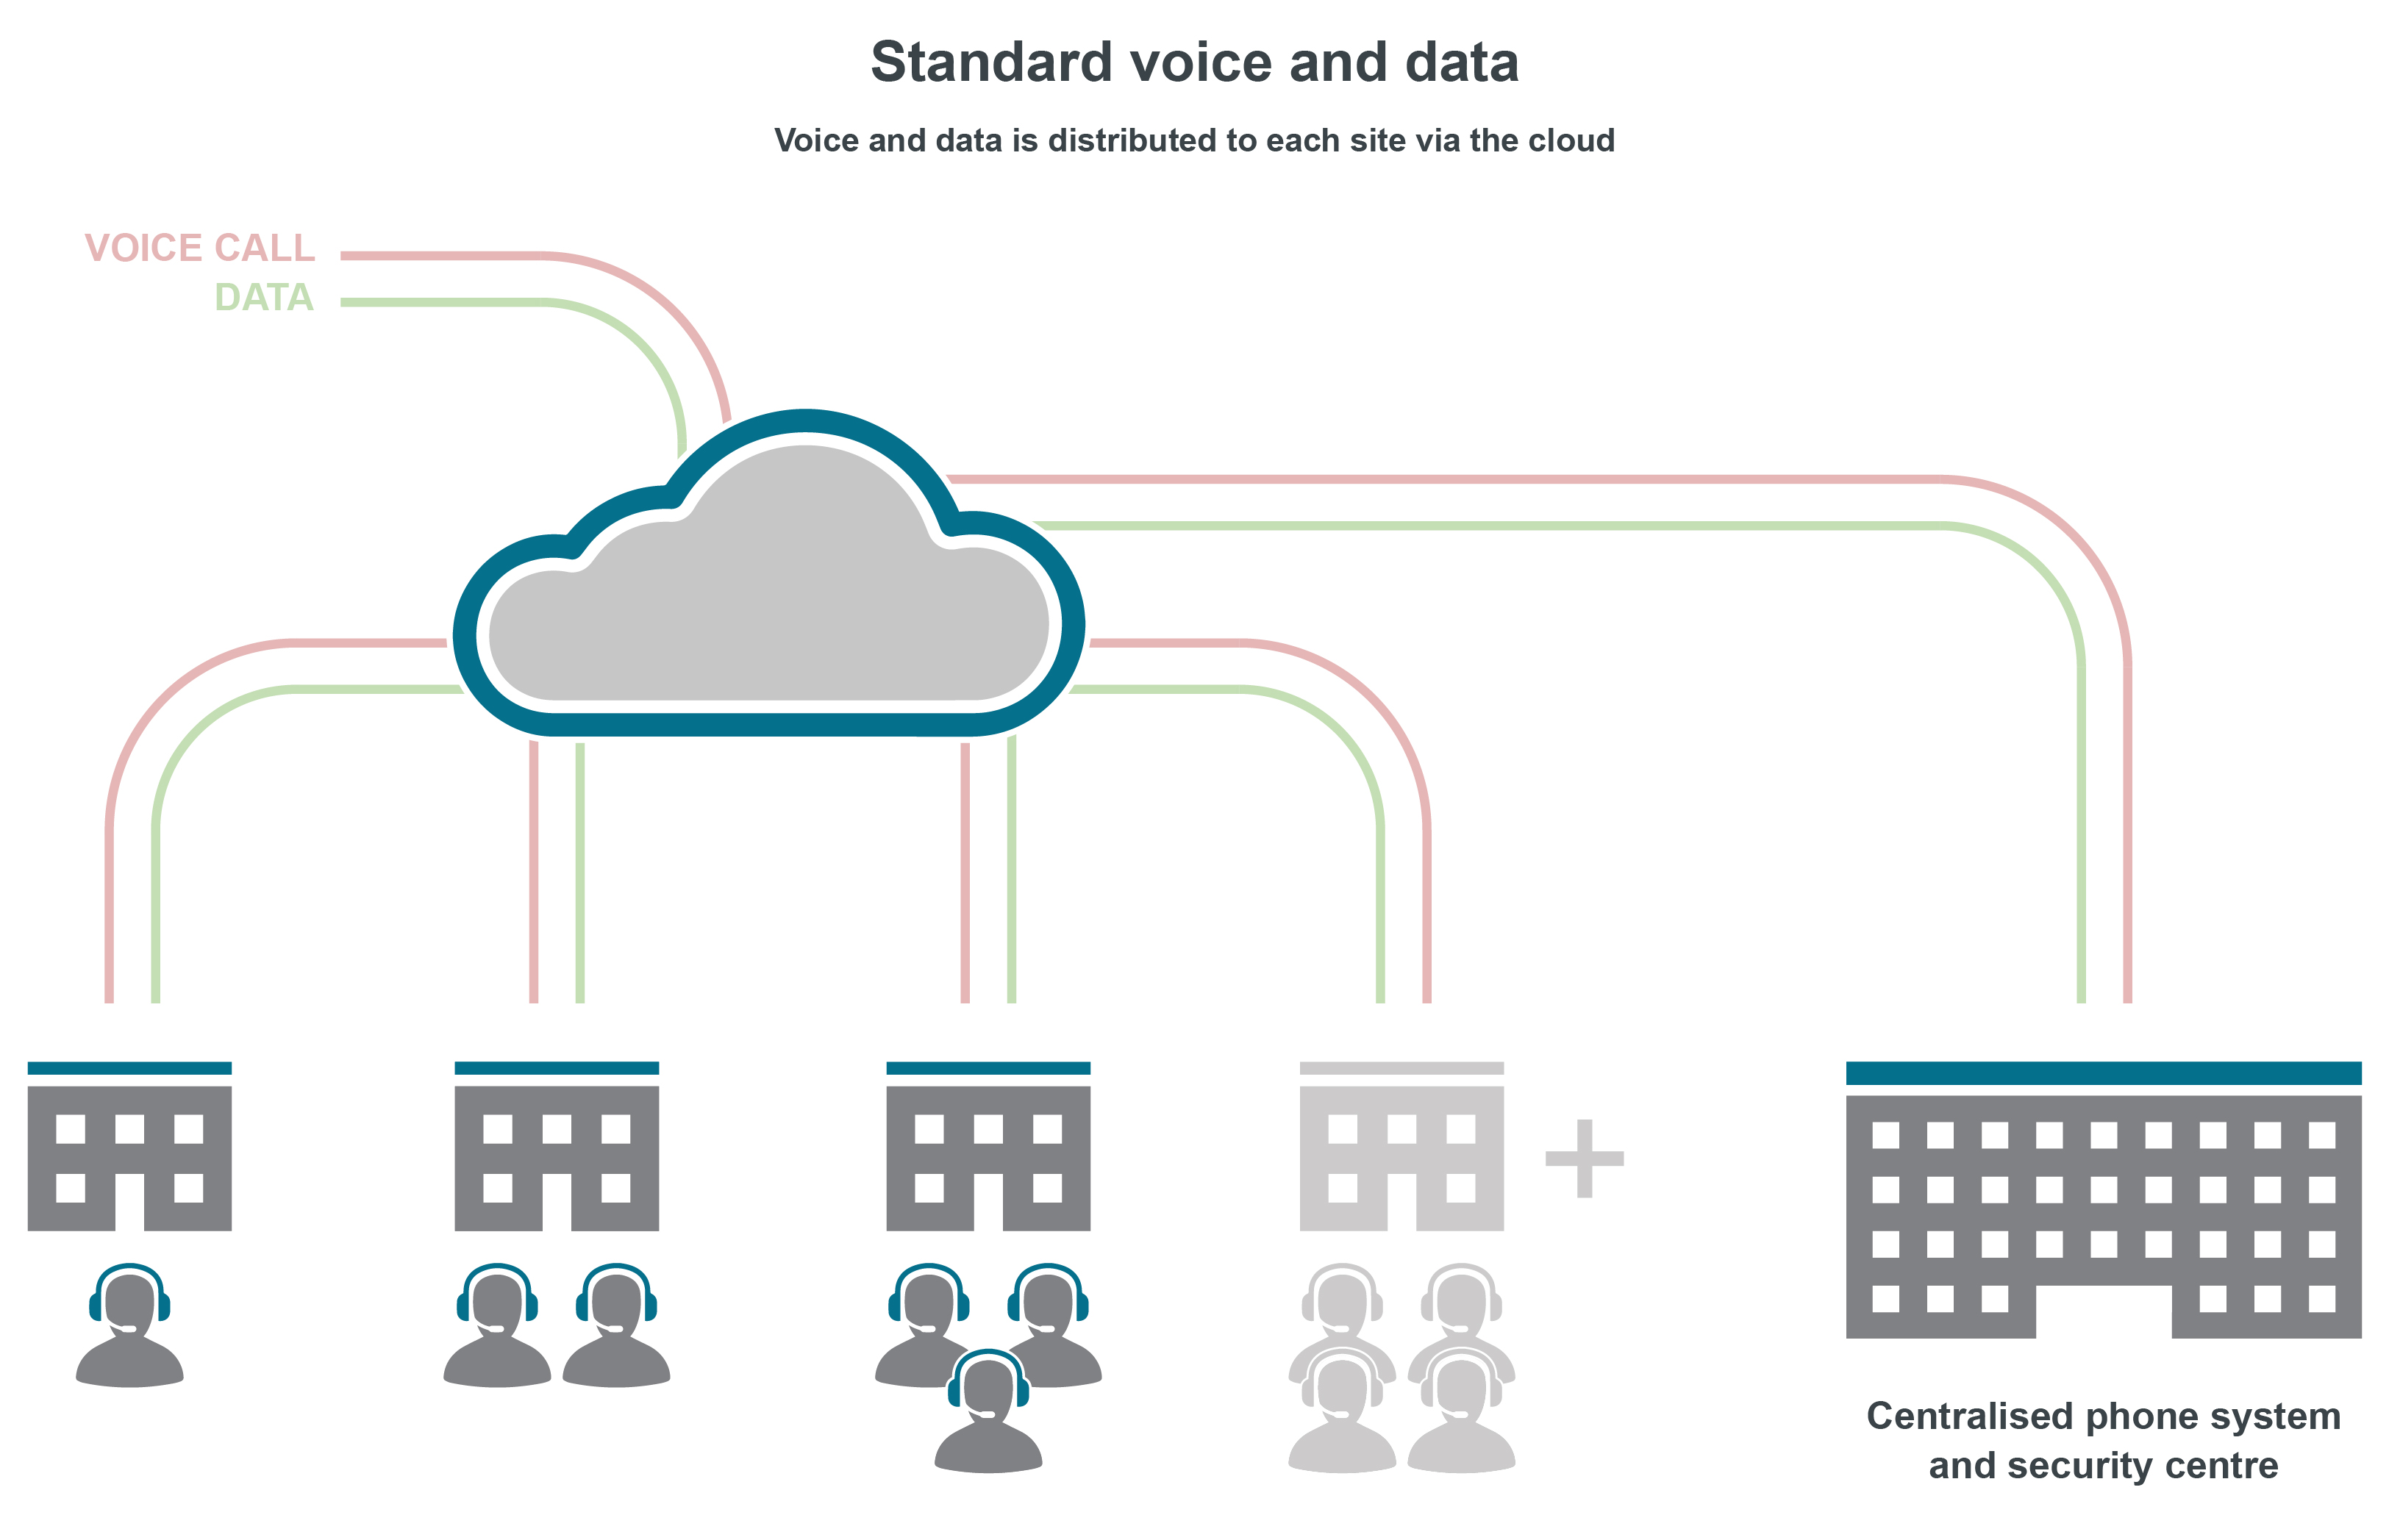 Standard voice and data telephone systems